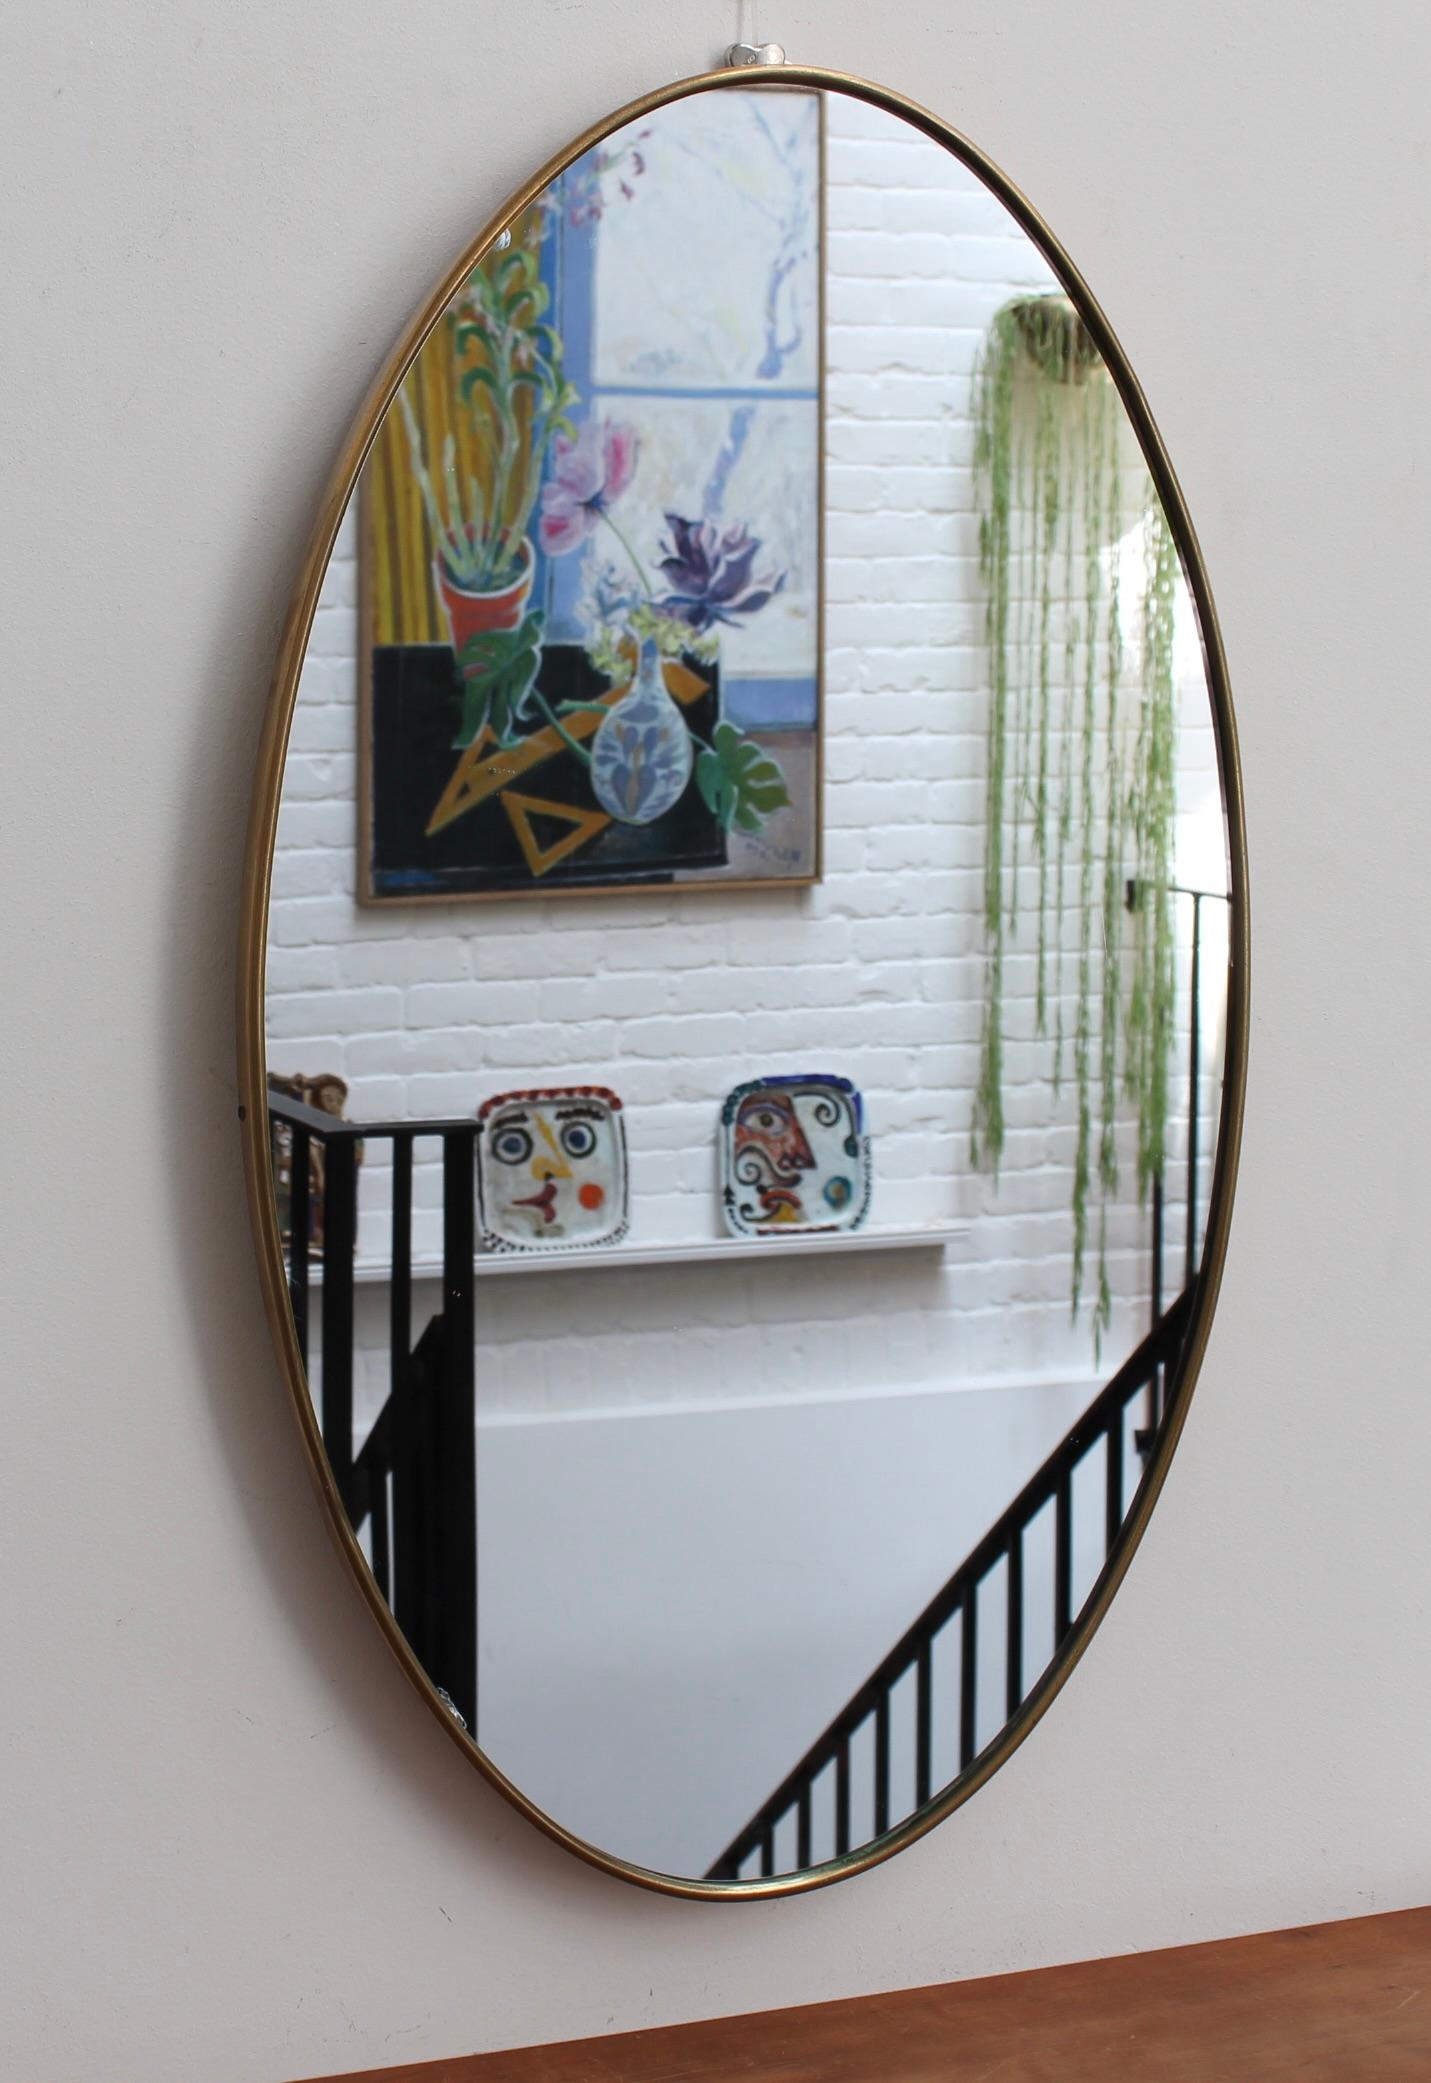 Mid-century Italian oval wall mirror with brass frame (circa 1950s). The mirror is oval in shape and very smart with irresistible durability. The visual impression is elegant and very distinctive in a modern Gio Ponti style. The mirror is in